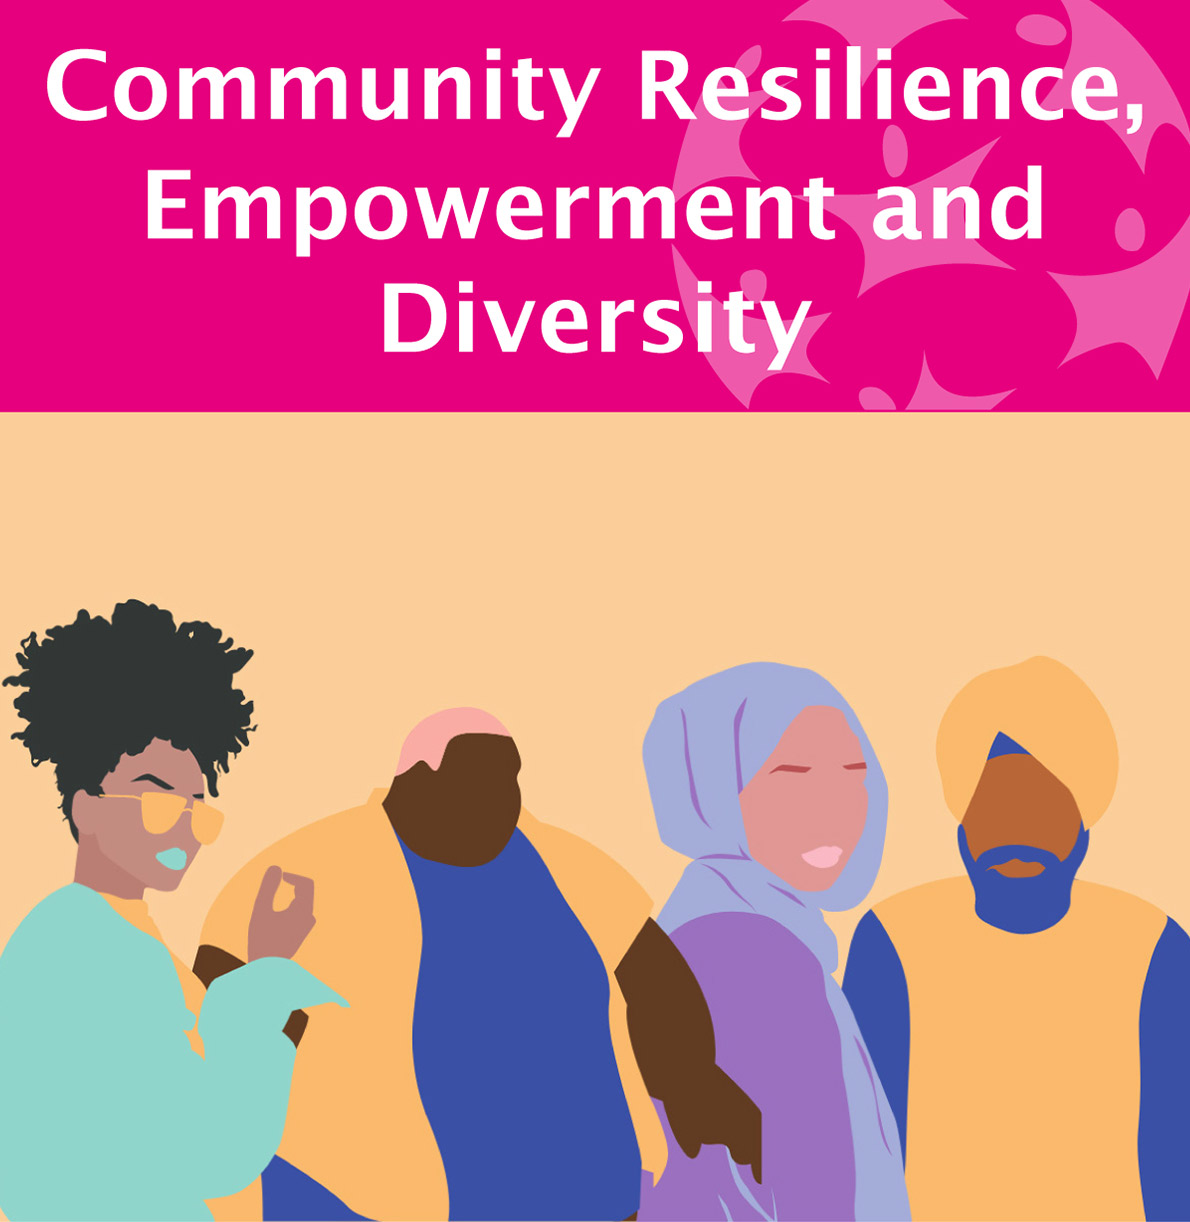 Community Resilience, Empowerment and Diversity